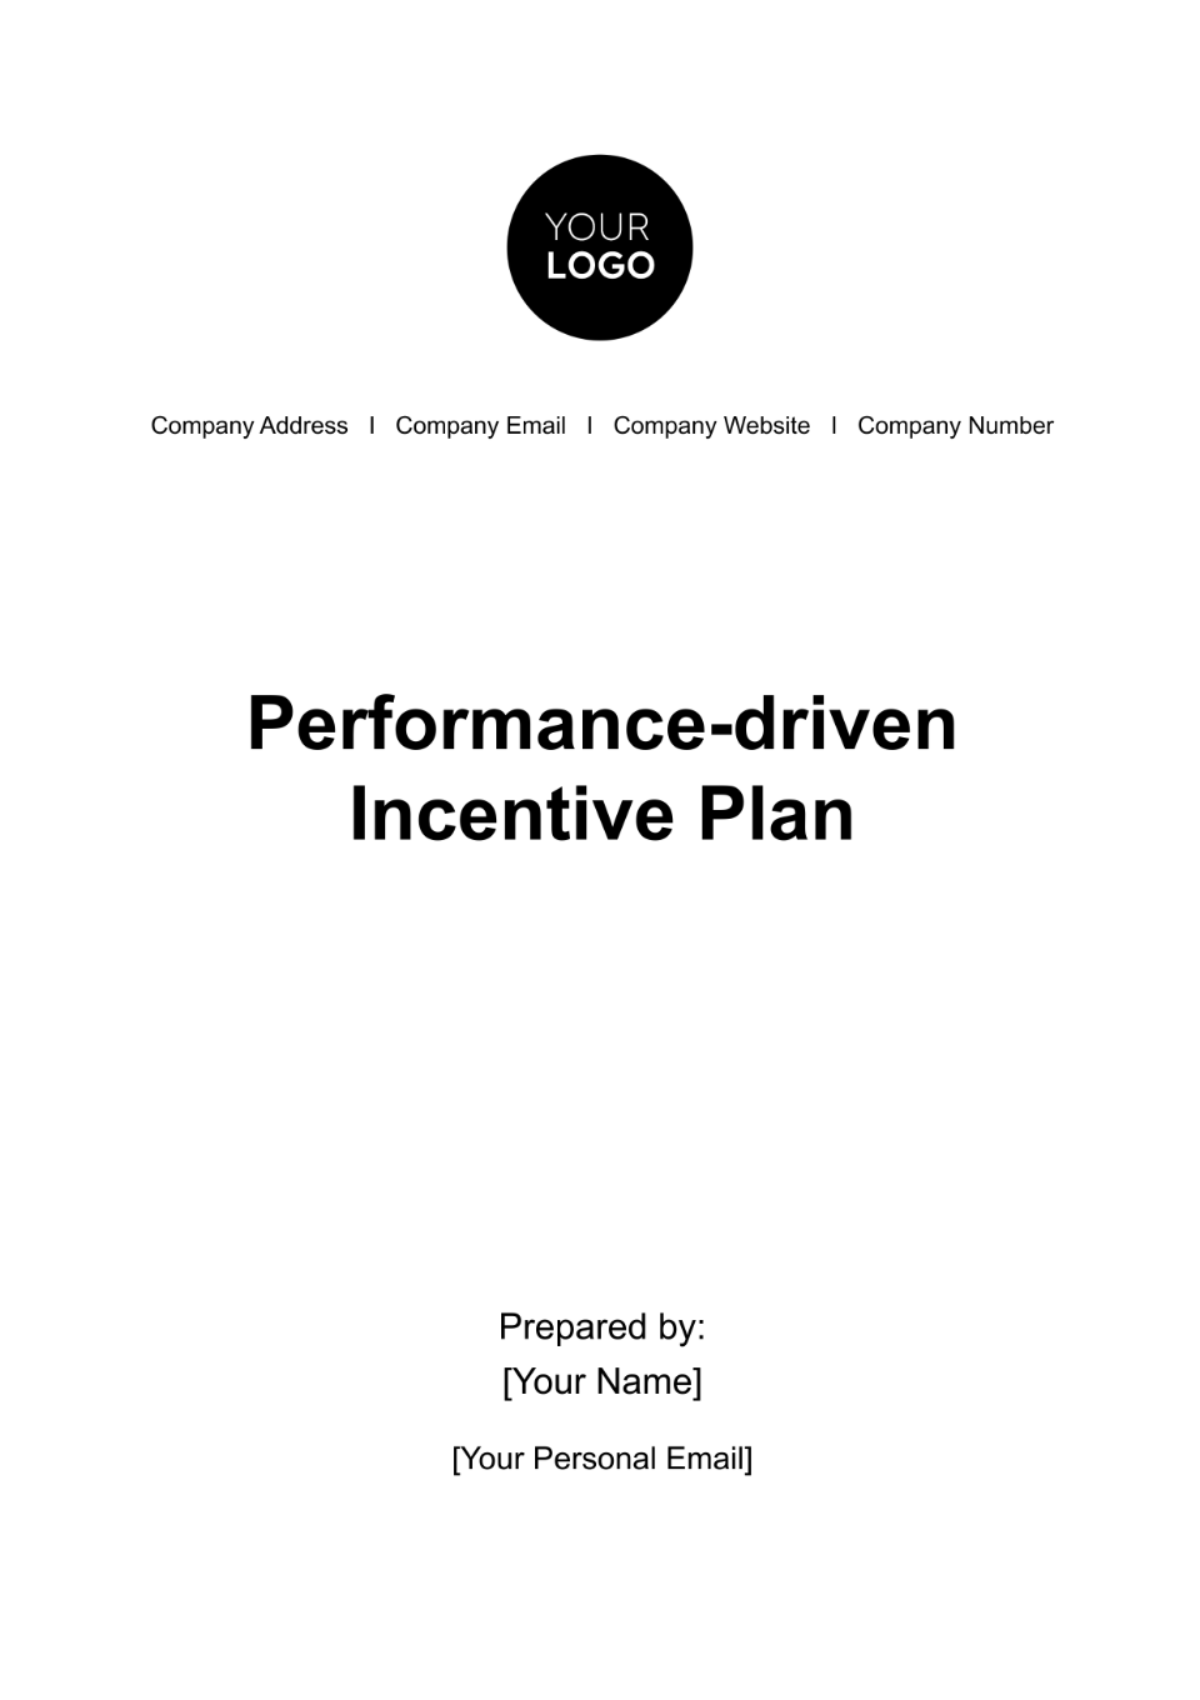 Performance-driven Incentive Plan HR Template